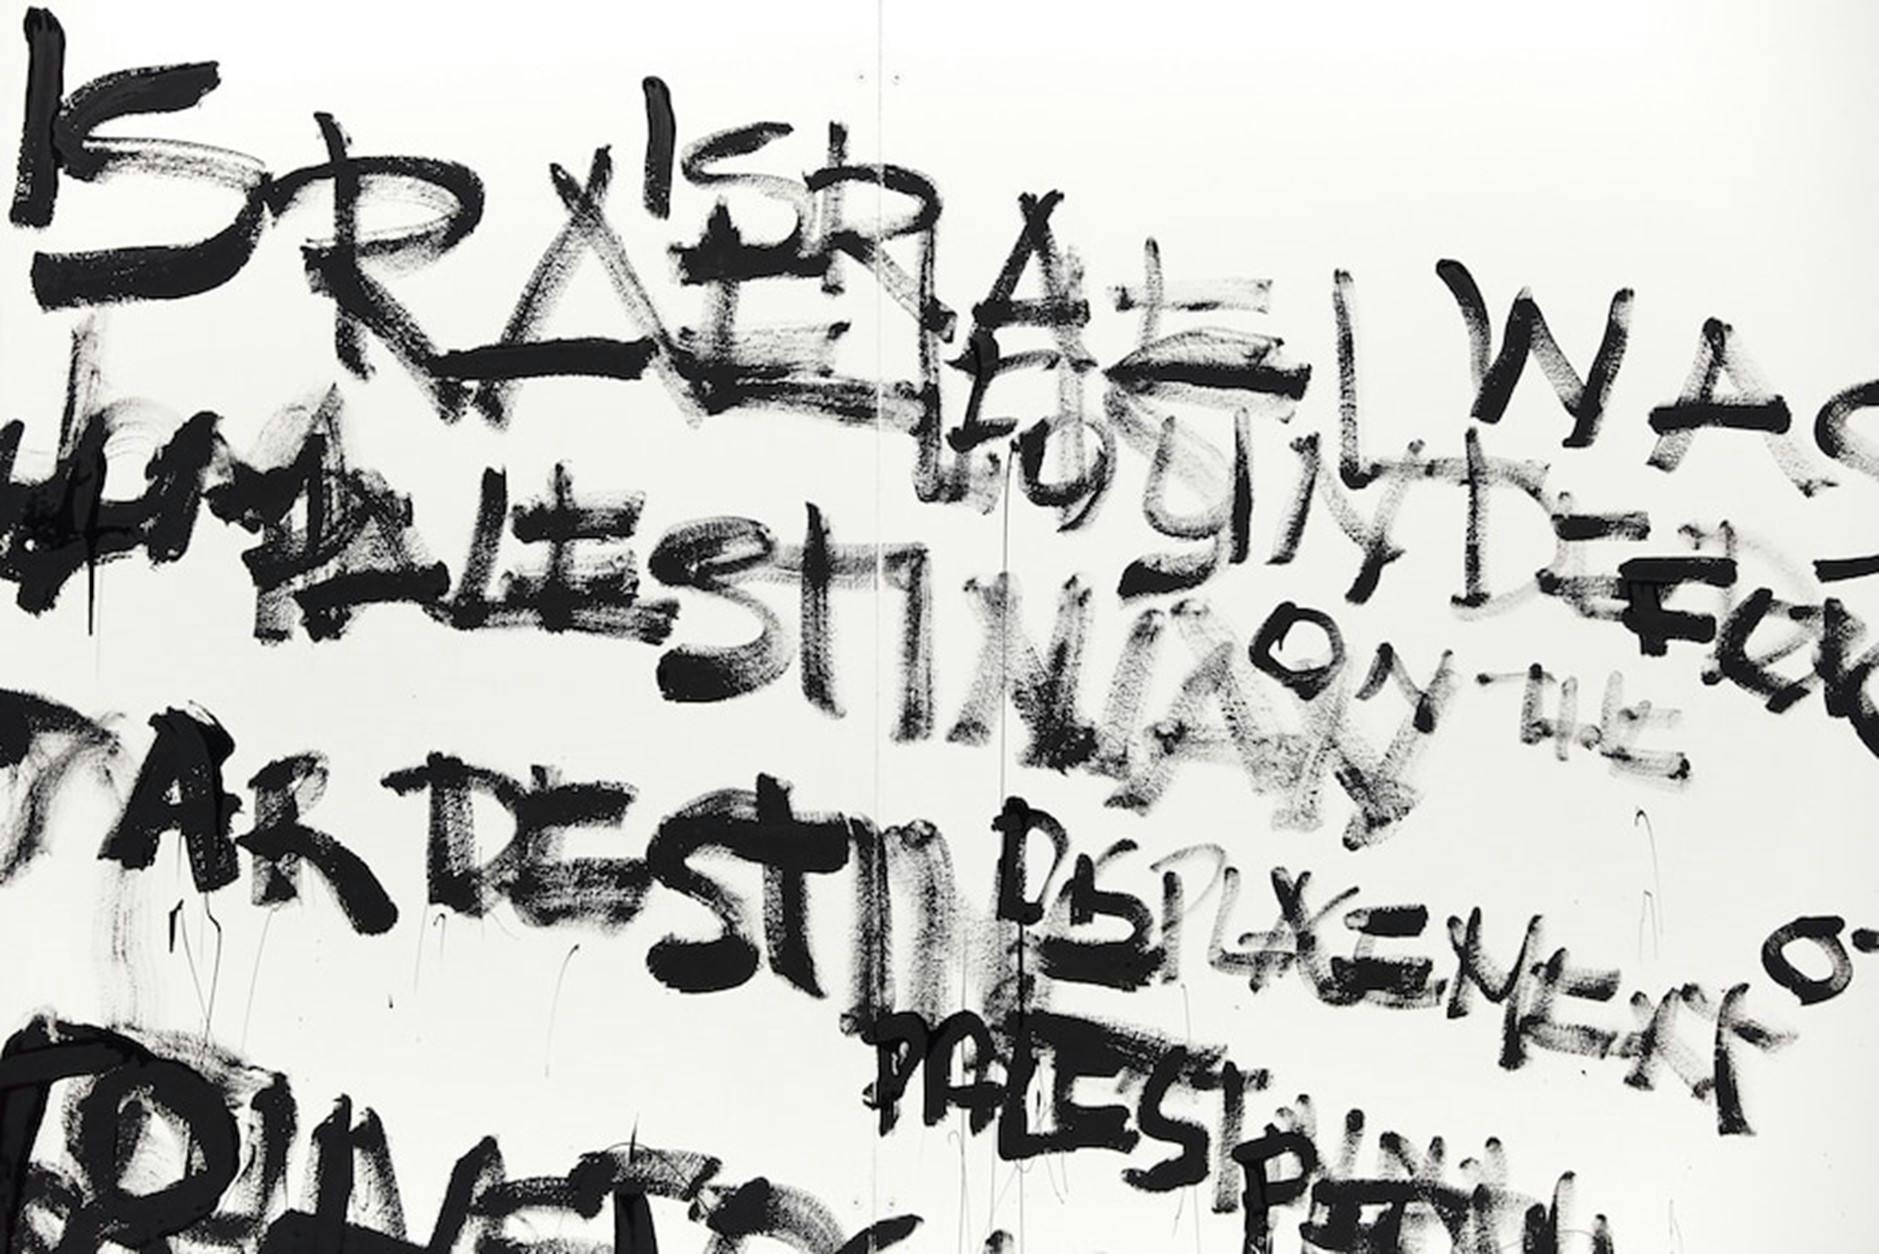 Graffiti style writing including the words Israel and Palestine